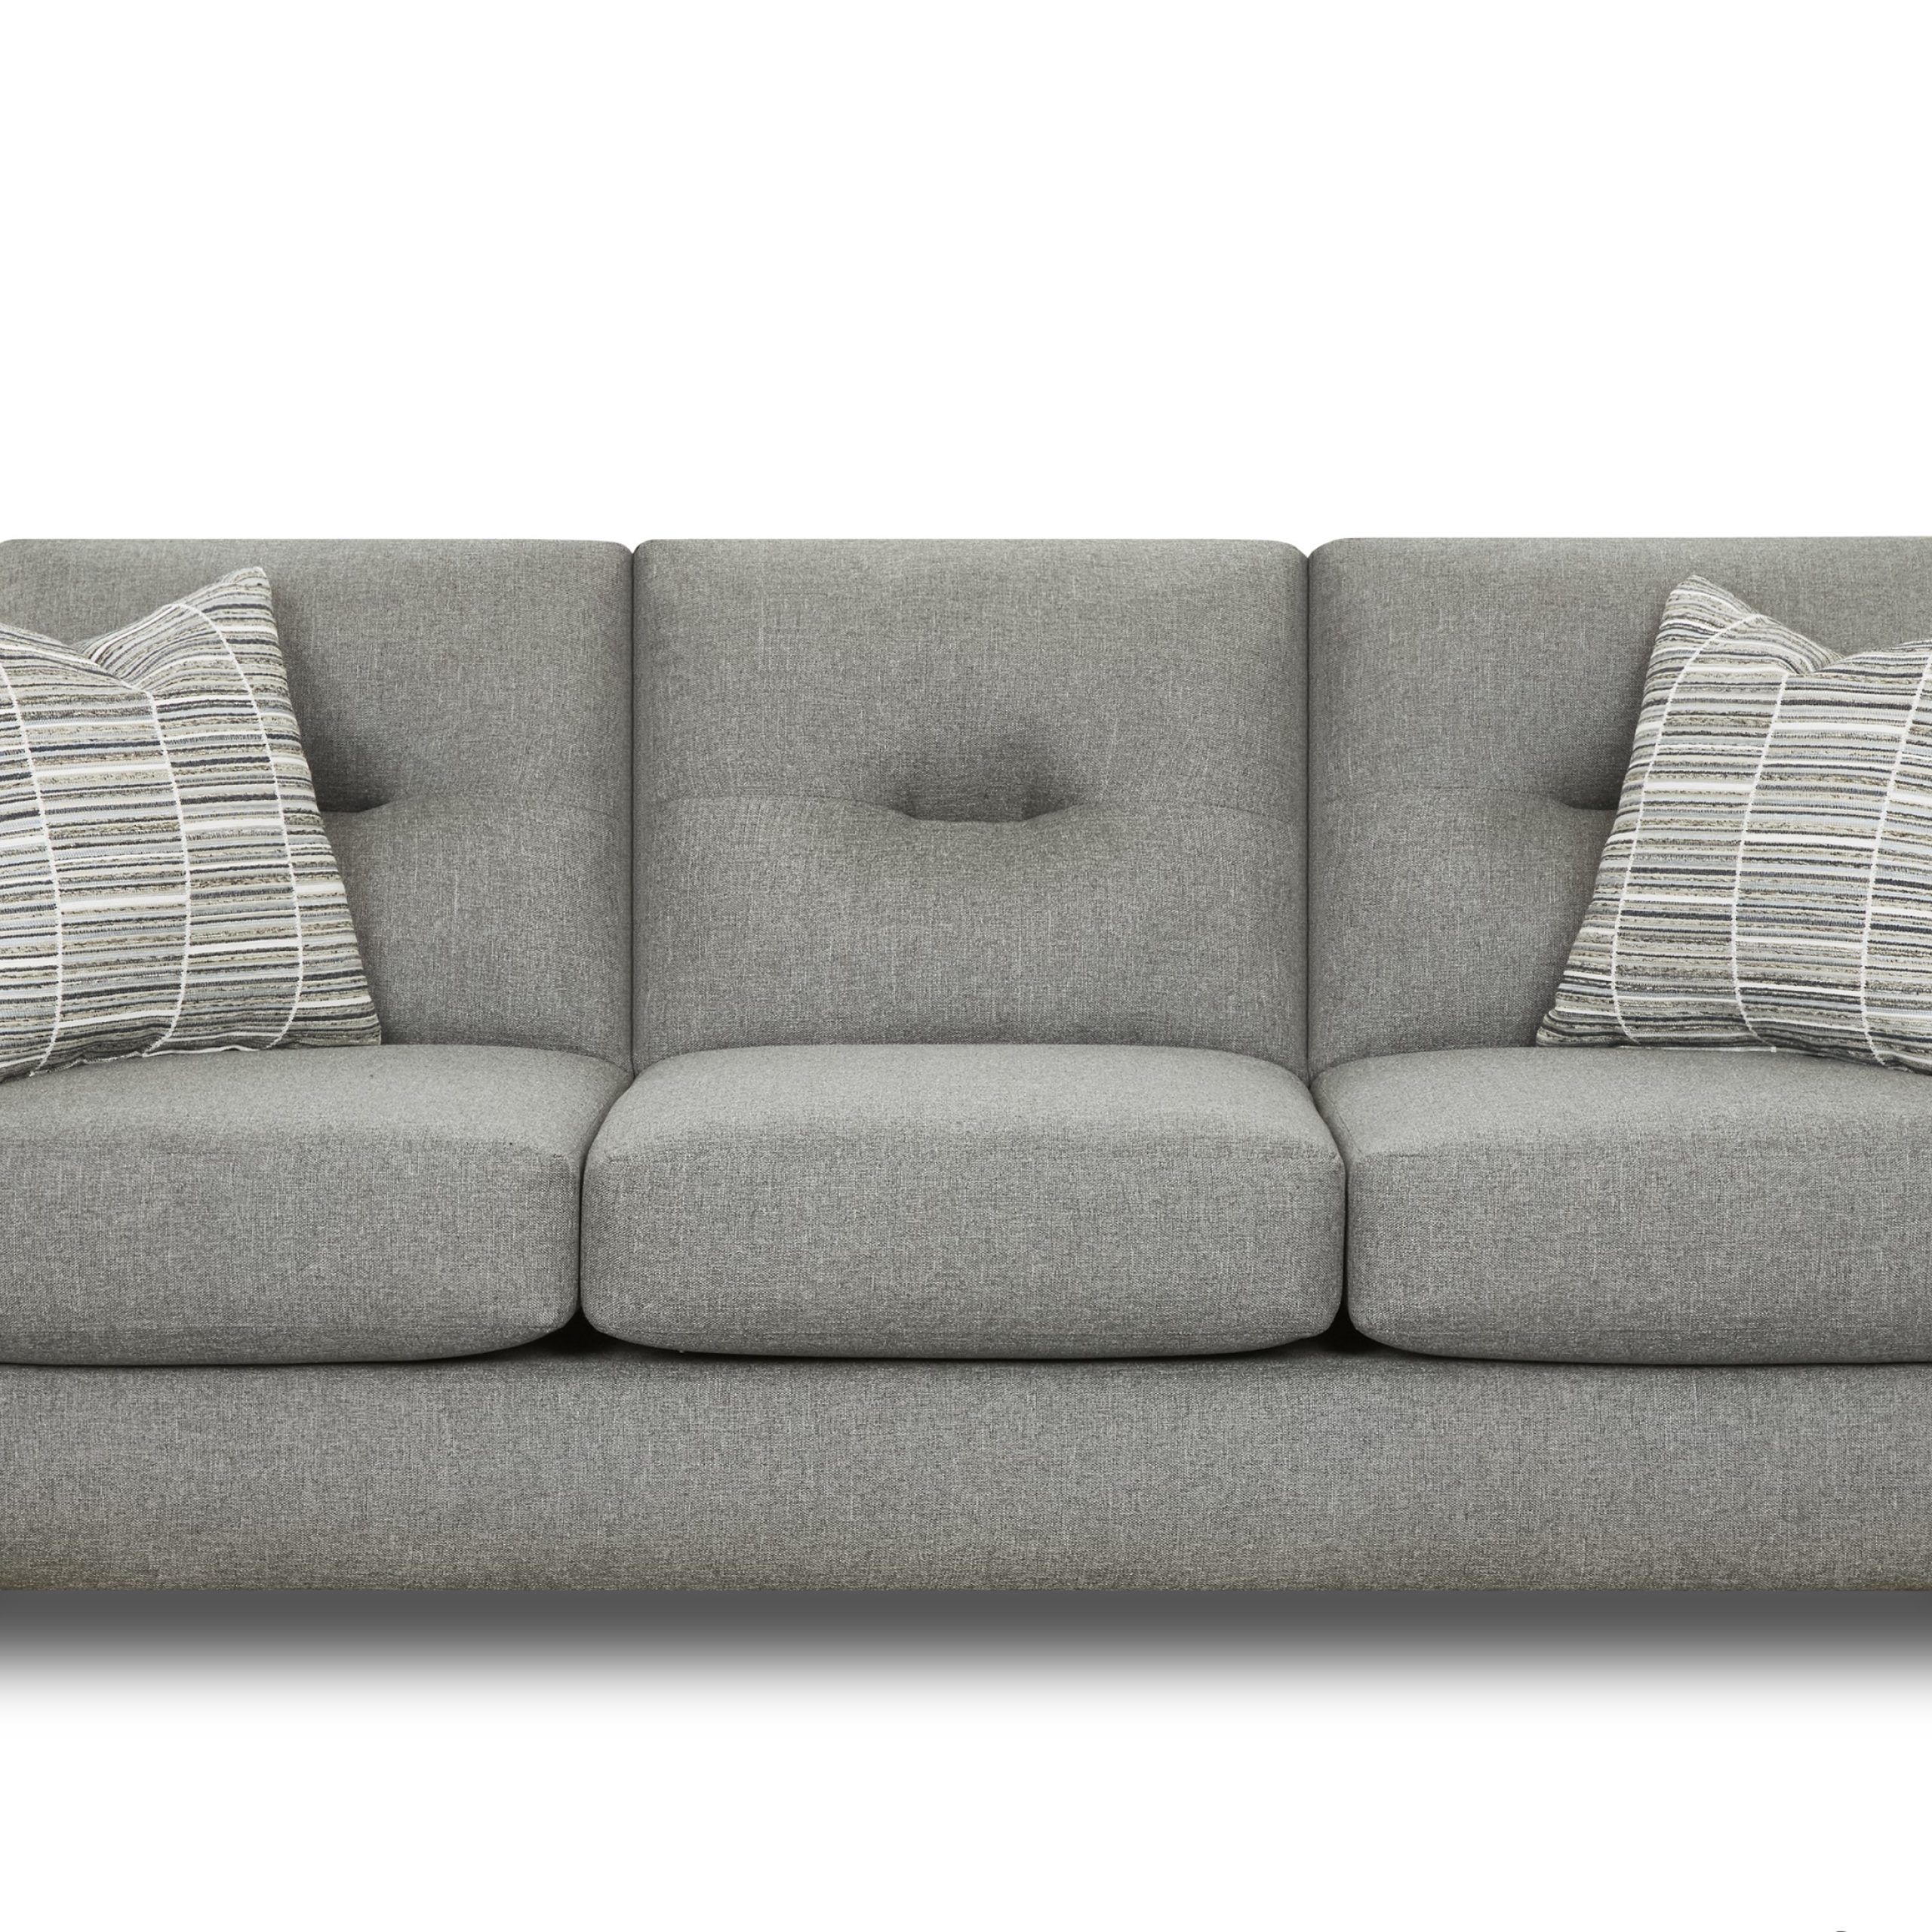 Tnt Charcoal Sofa B018638917fusion Furniture At Godwin's Furniture For Most Up To Date Light Charcoal Linen Sofas (View 12 of 15)